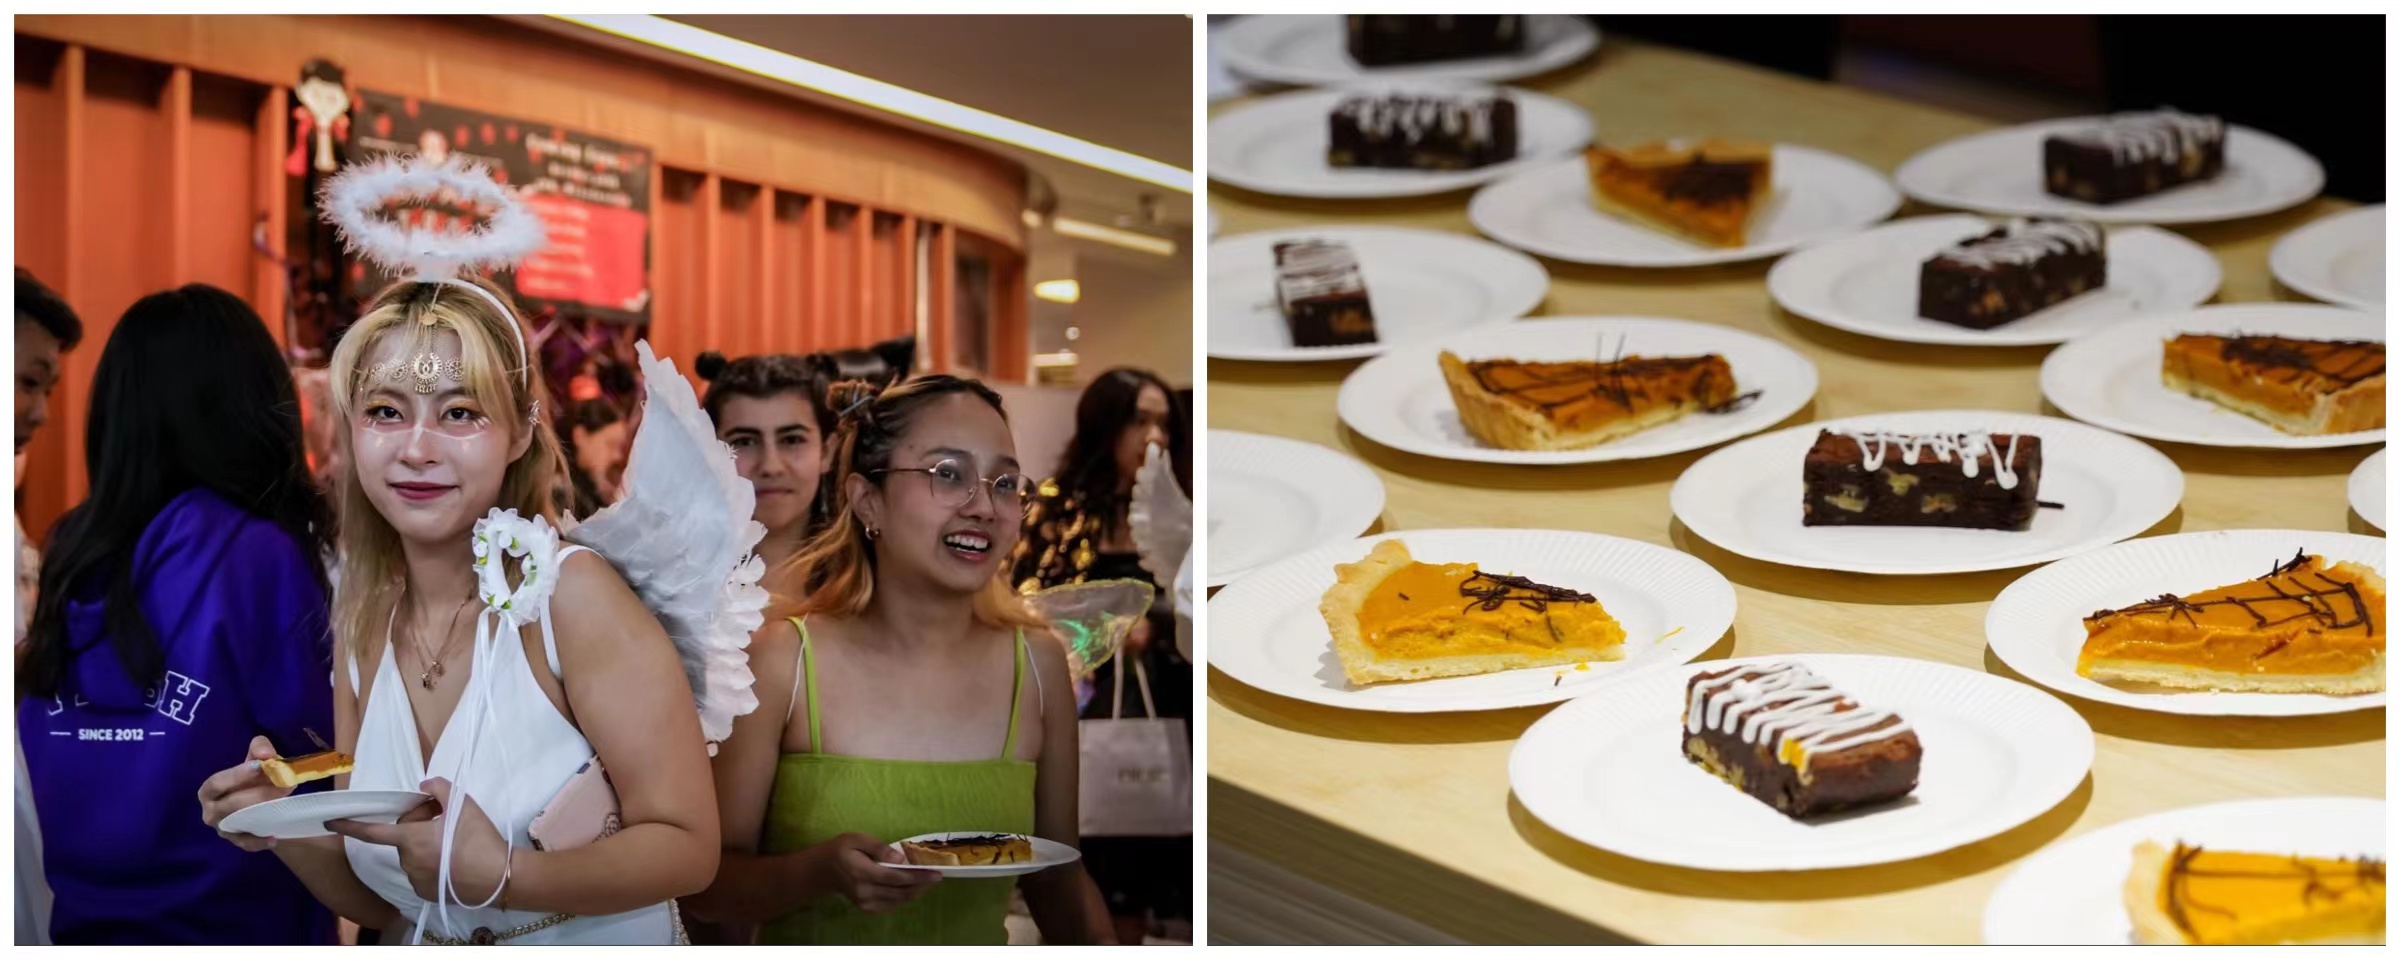 Left: 2 dressed up students holding slices of pie. Right: many slices of pumpkin and chocolate pie on a table. 